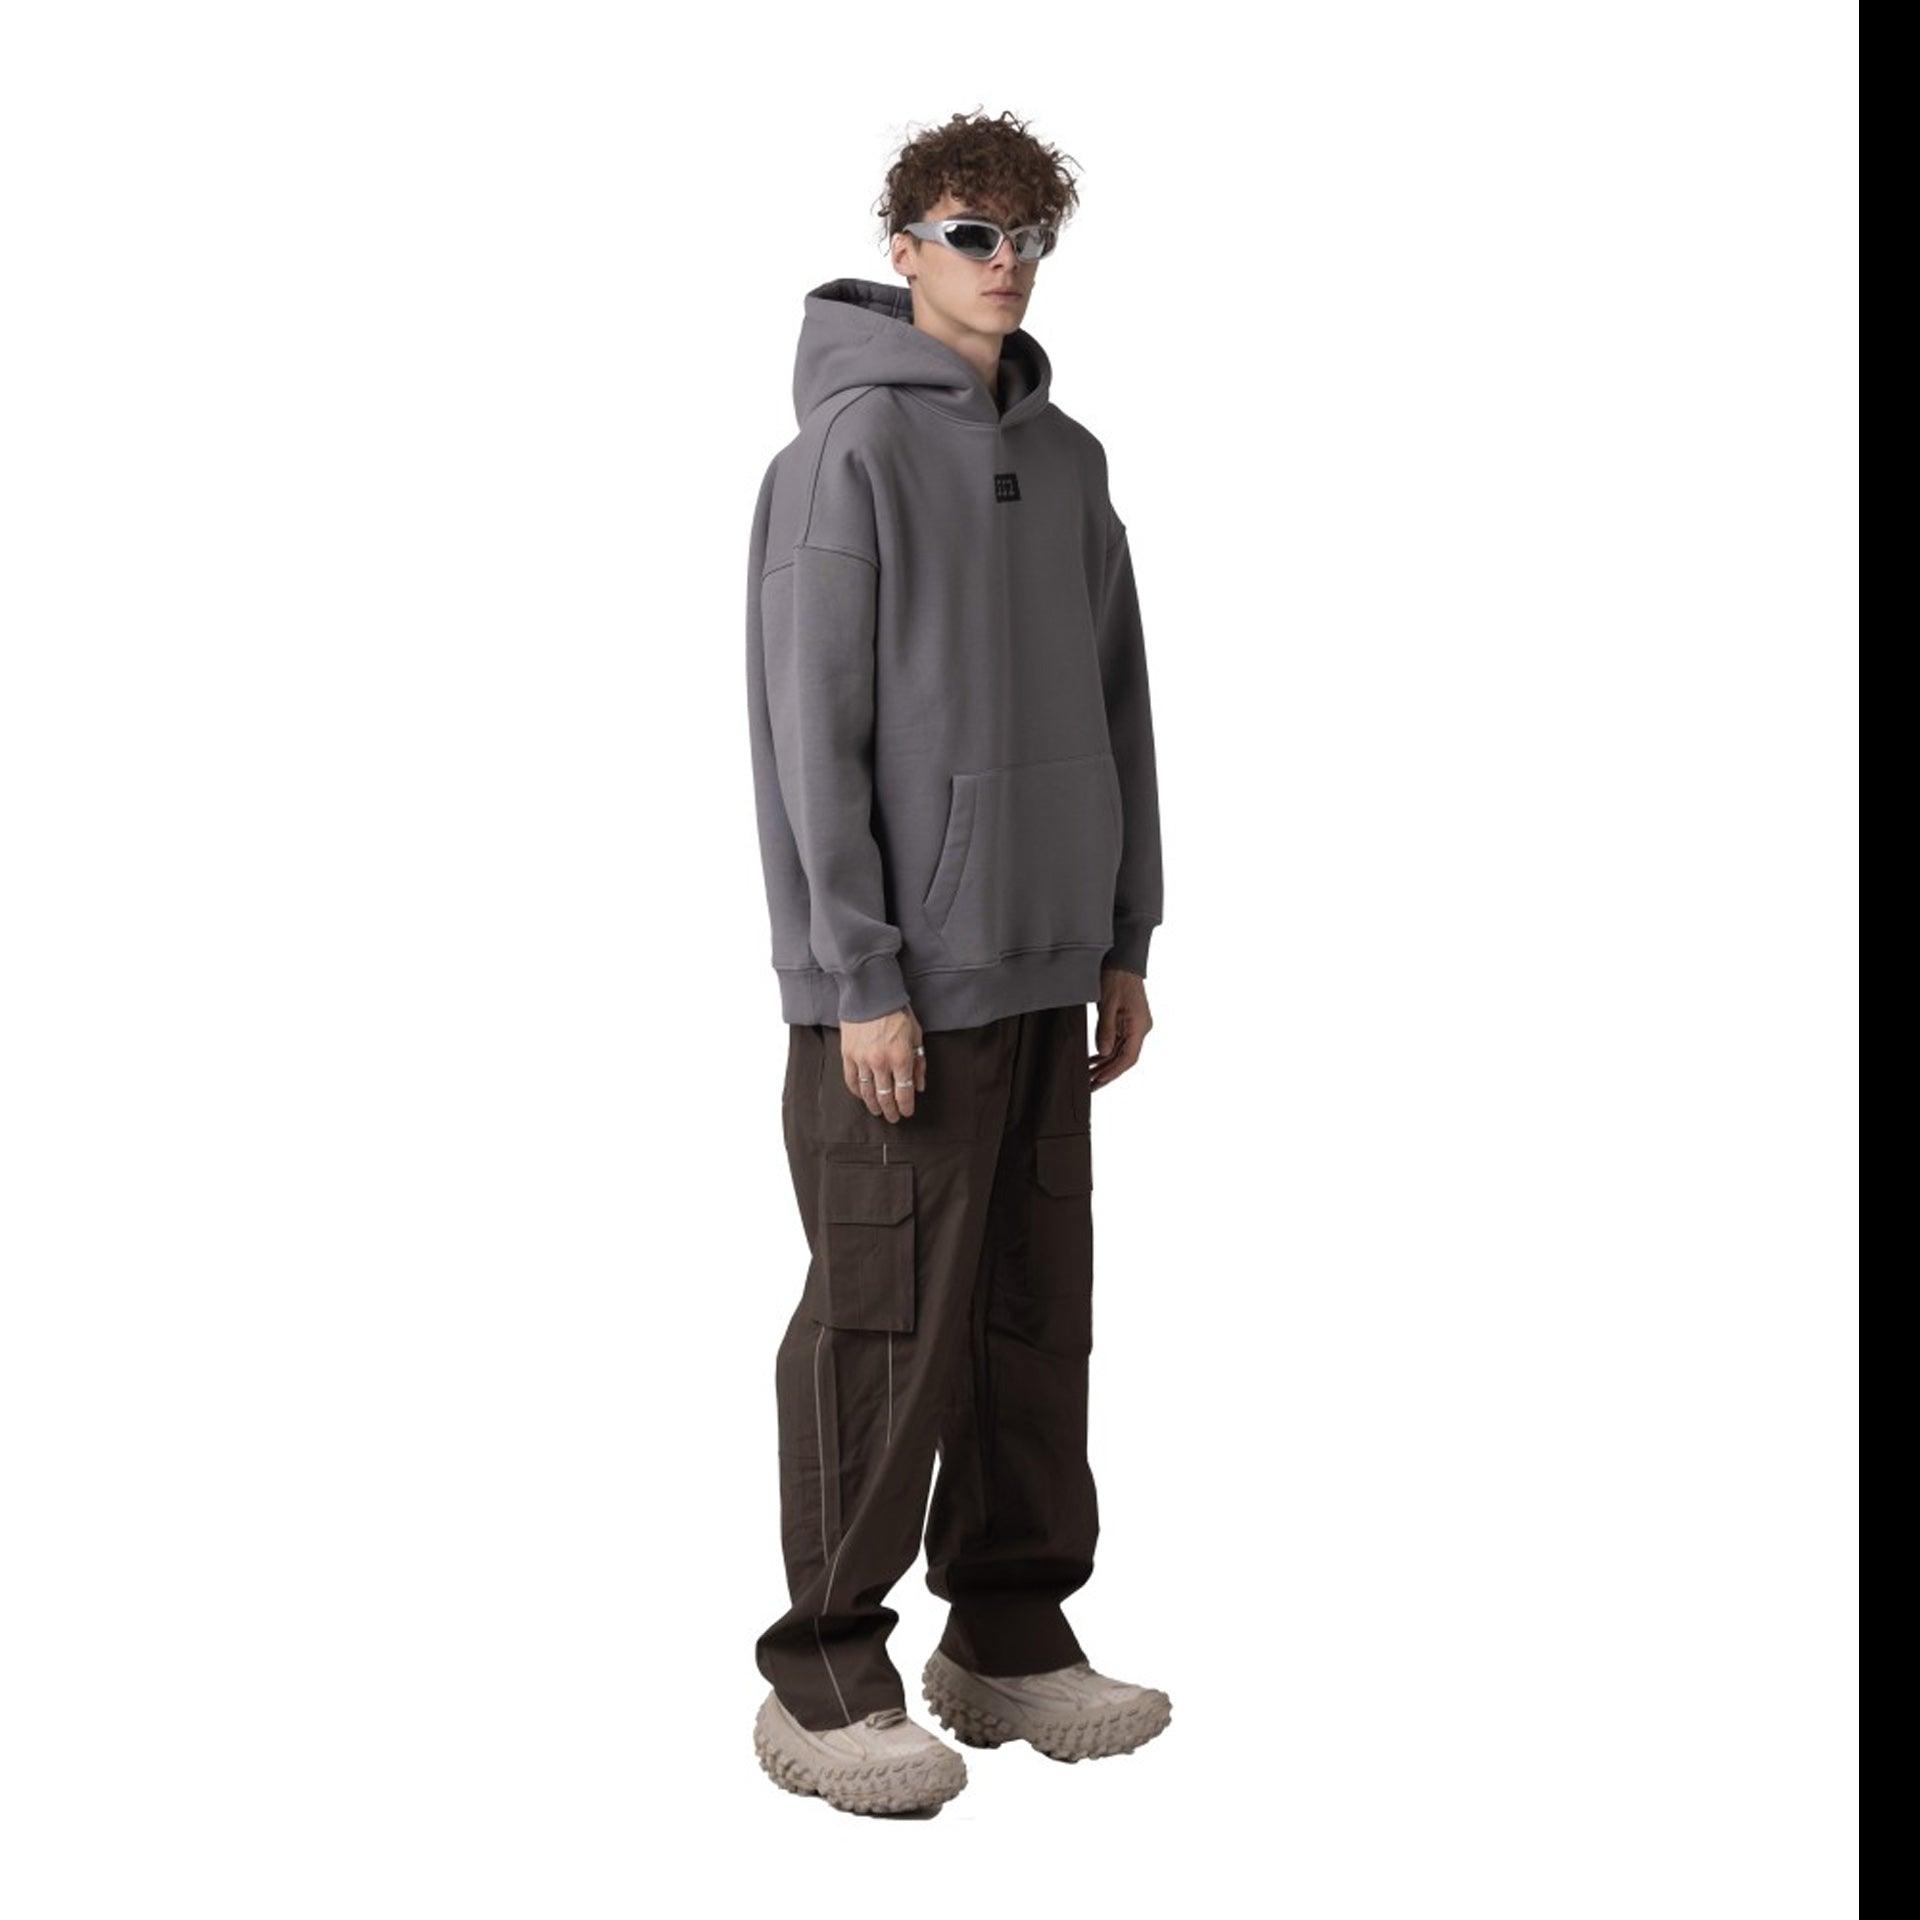 Light Gray Pullover Hoodie From S32 - WECRE8